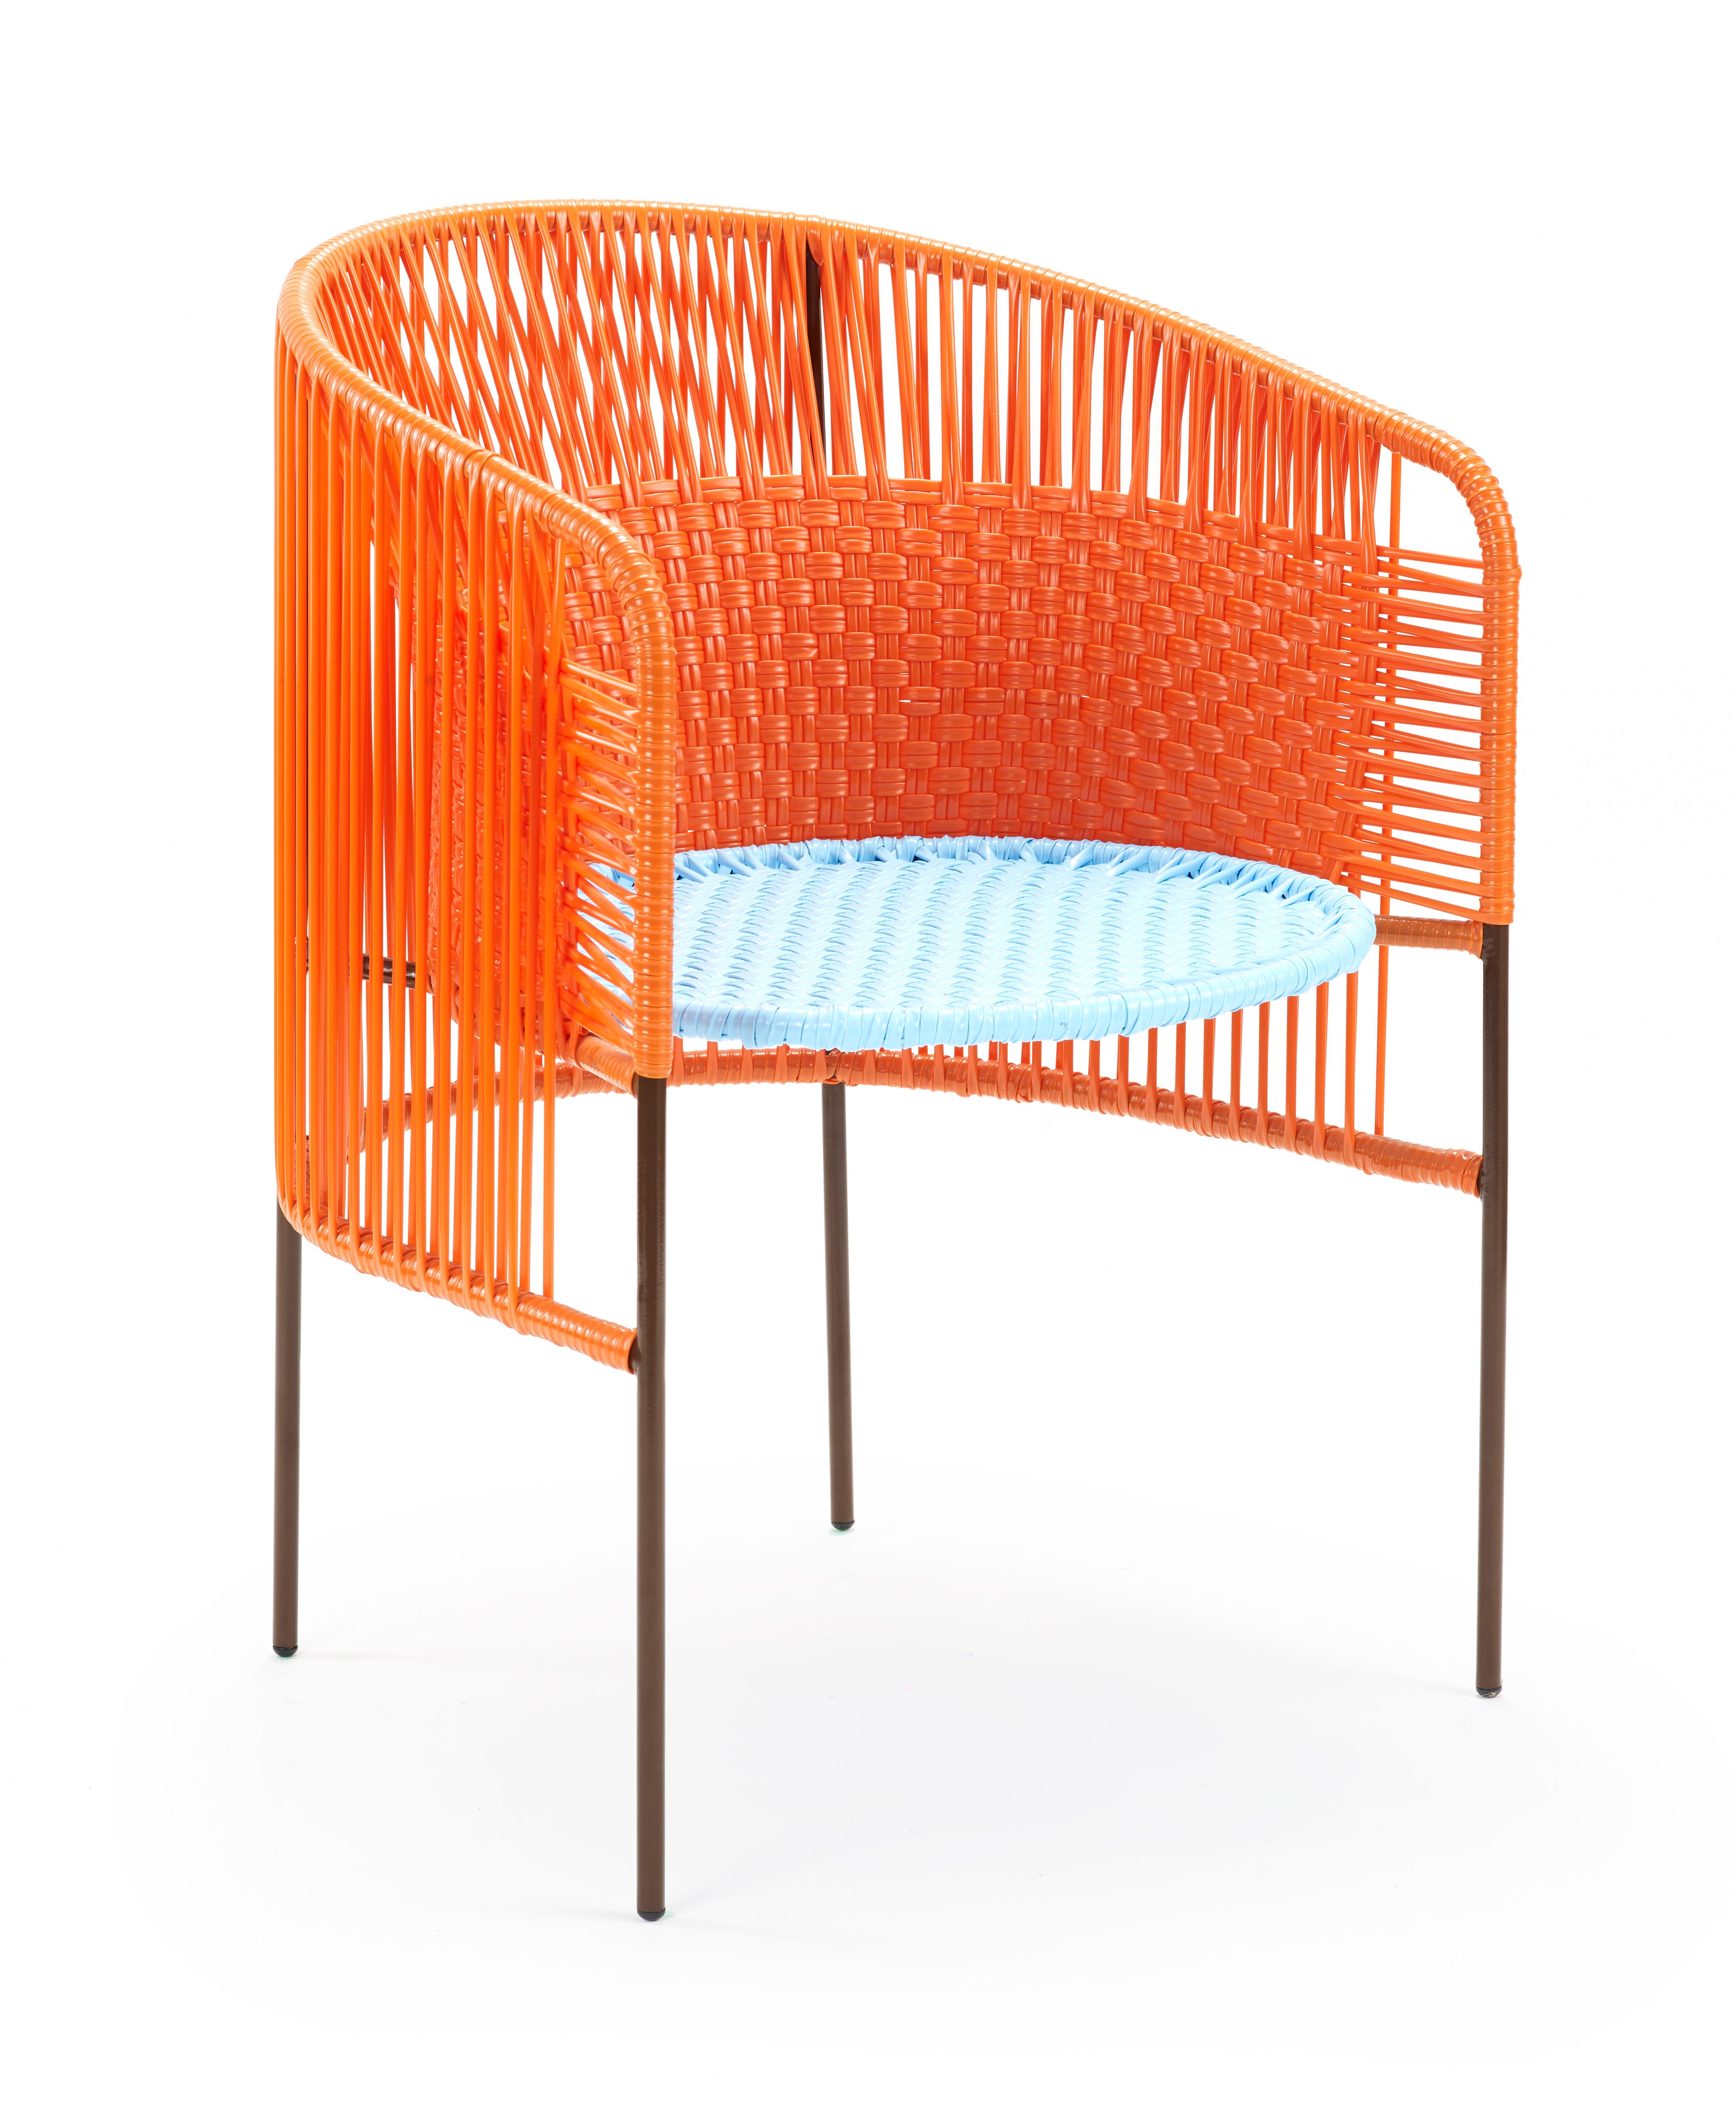 Set of 2 Orange mint caribe dining chair by Sebastian Herkner
Materials: Galvanized and powder-coated tubular steel. PVC strings are made from recycled plastic.
Technique: Made from recycled plastic and weaved by local craftspeople in Colombia.